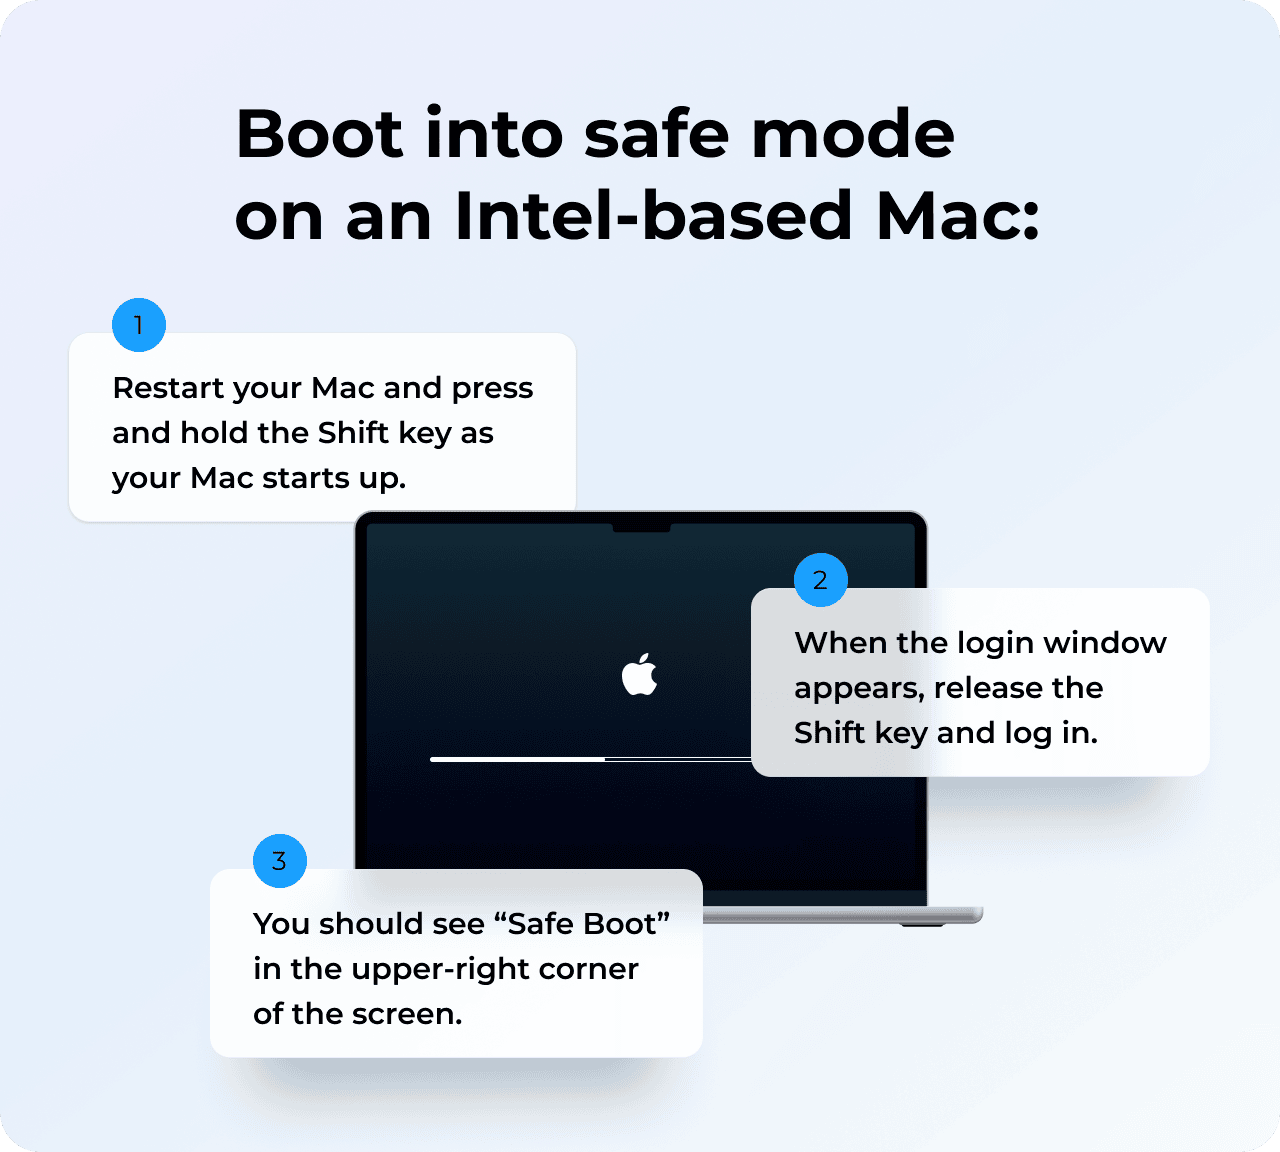 Boot into safe mode on Intel-based Macs